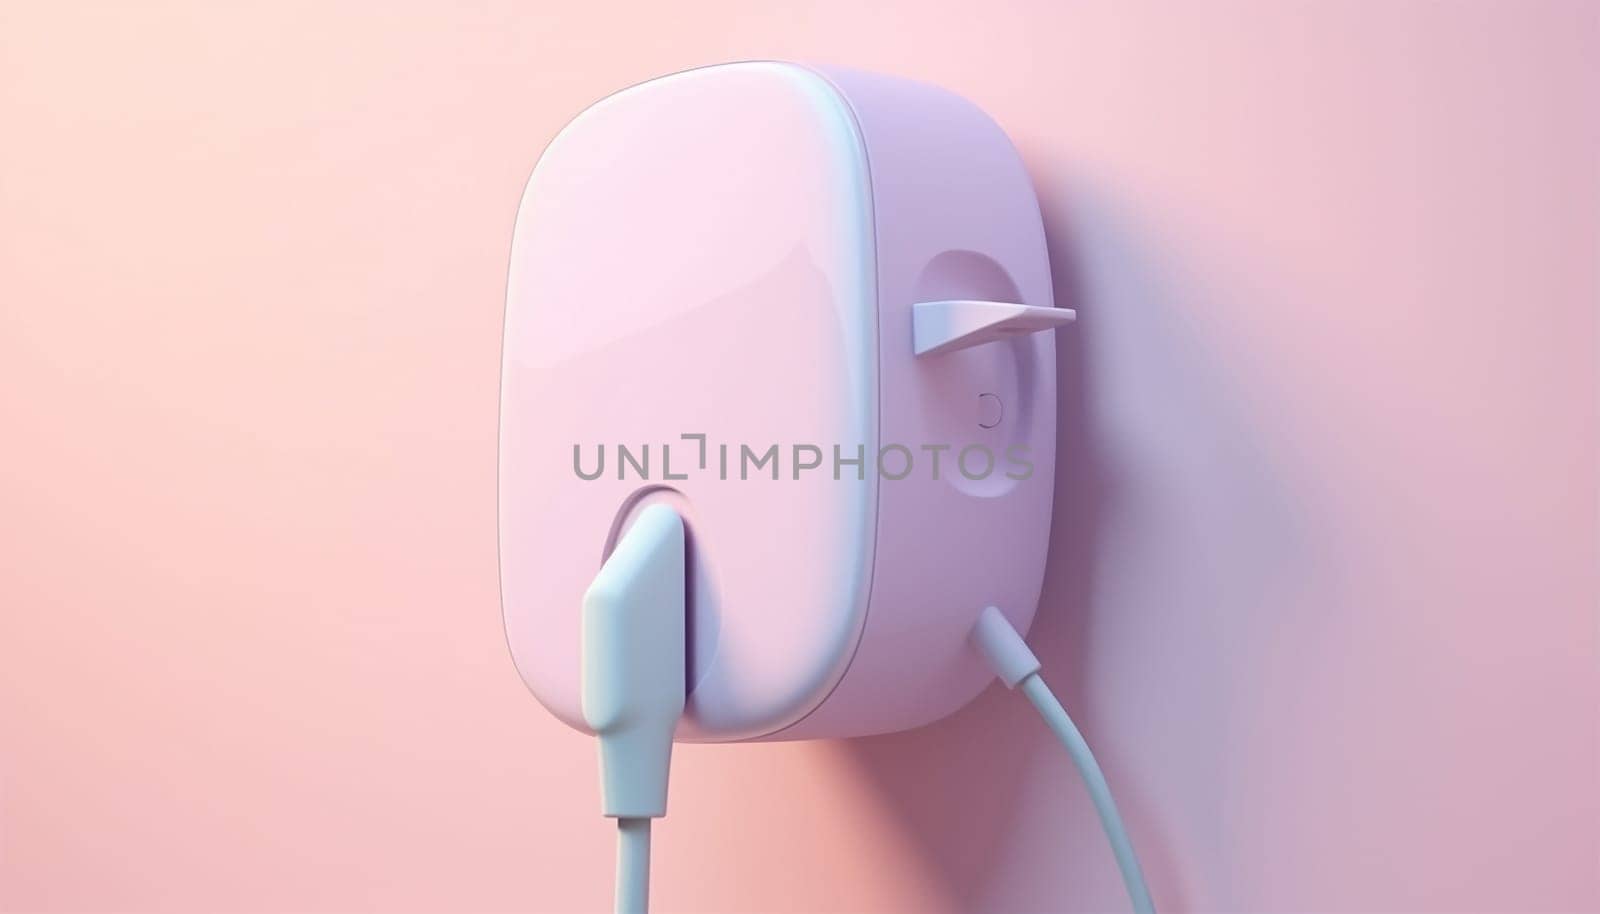 Electric car 3D charging background. Electronic vehicle power dock. EV Plugin station. Fuel recharge cells. pastel colored illustration. Power supply for electric car charging. Electric car charging station. Power supply plugged into an electric car being charged concept by Annebel146